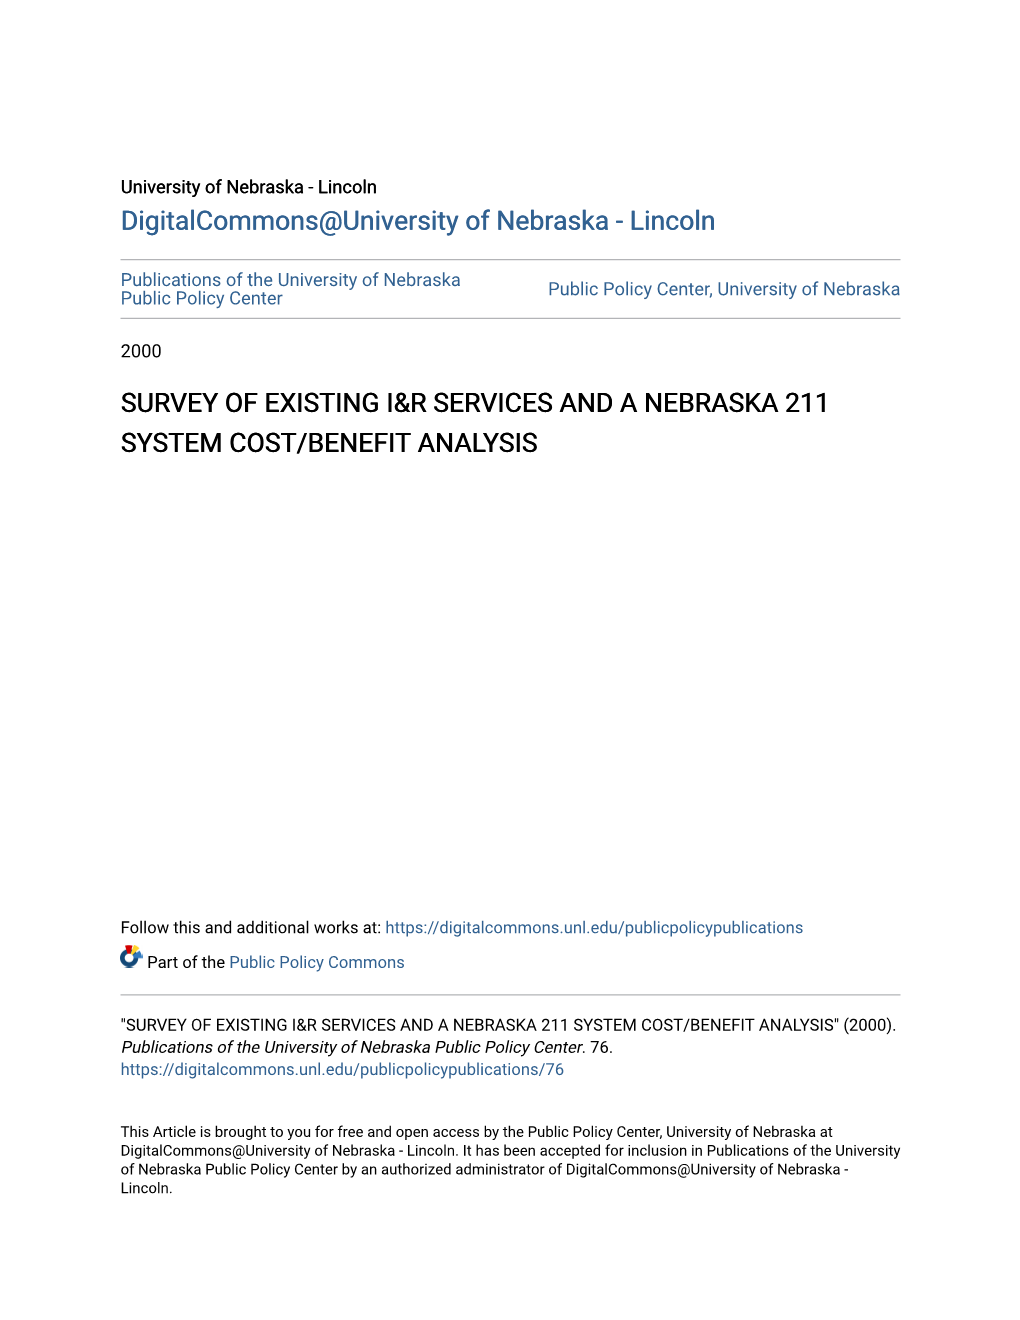 Survey of Existing I&R Services and a Nebraska 211 System Cost/Benefit